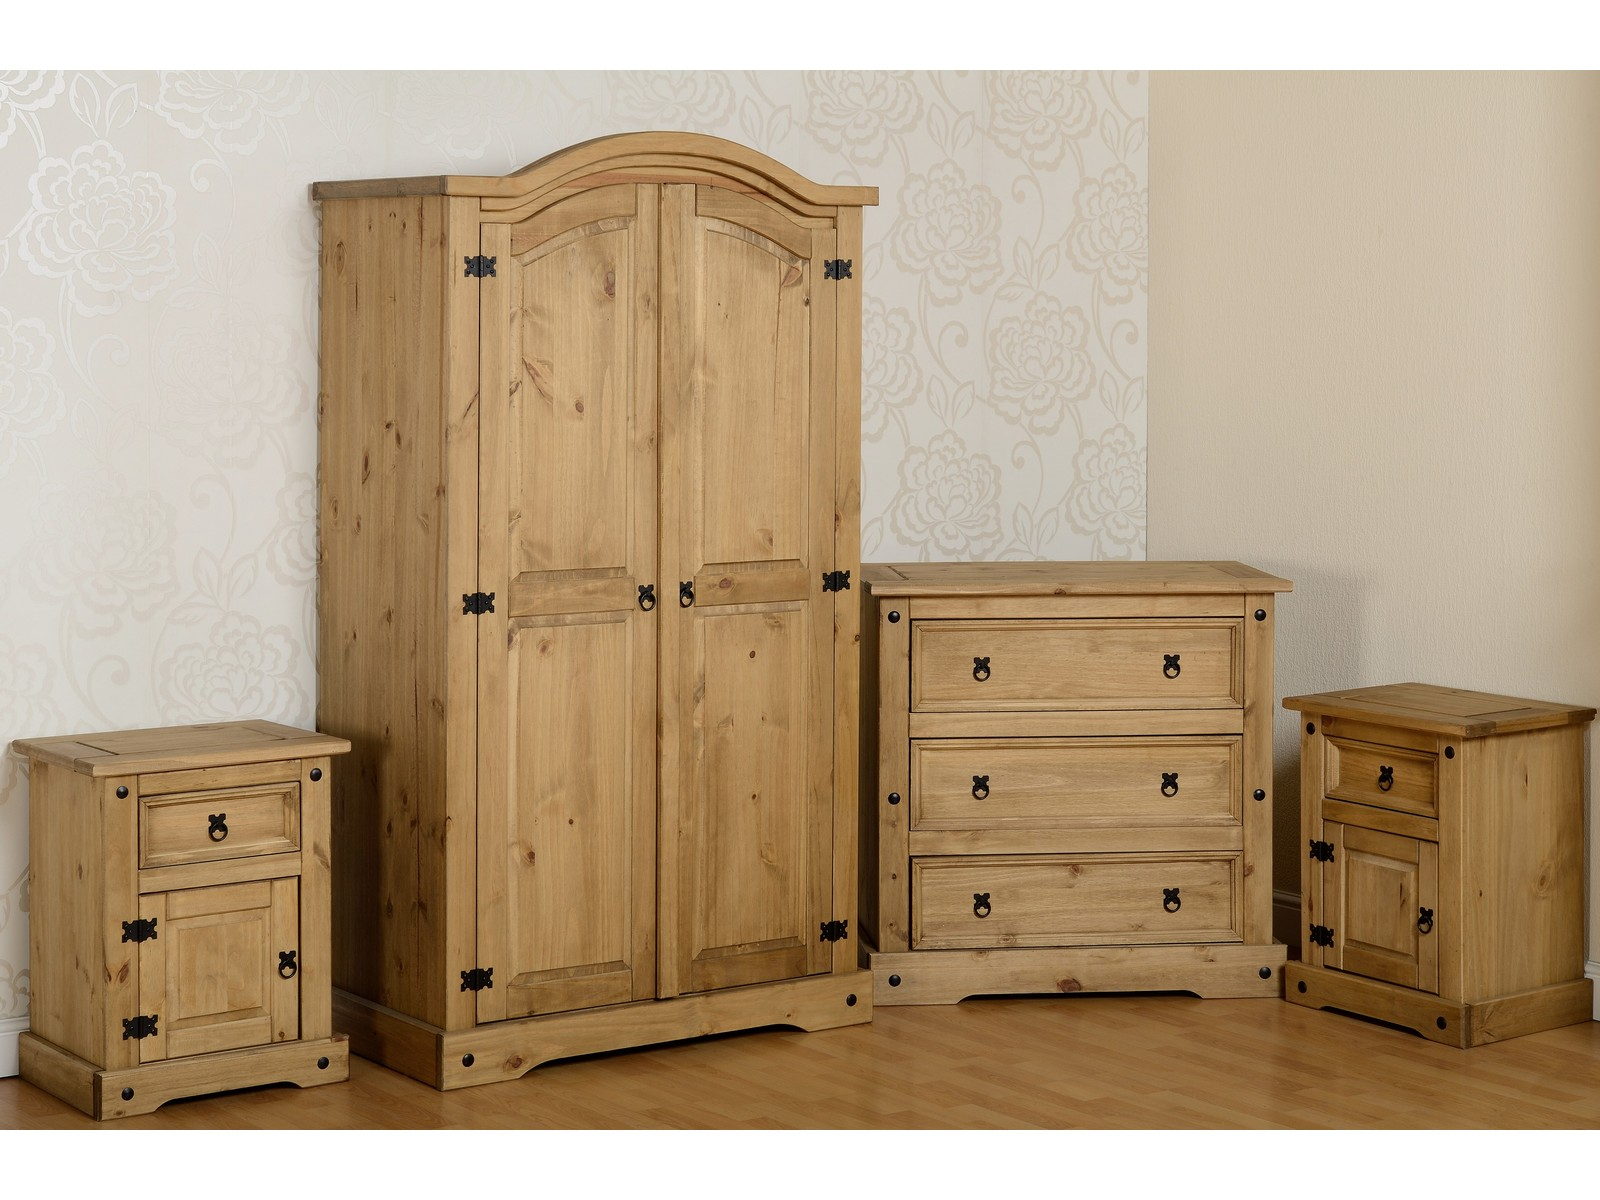 Details About Corona Mexican Pine 4 Piece Bedroom Furniture Set Wardrobe Chest Bedside Pair regarding size 1600 X 1200